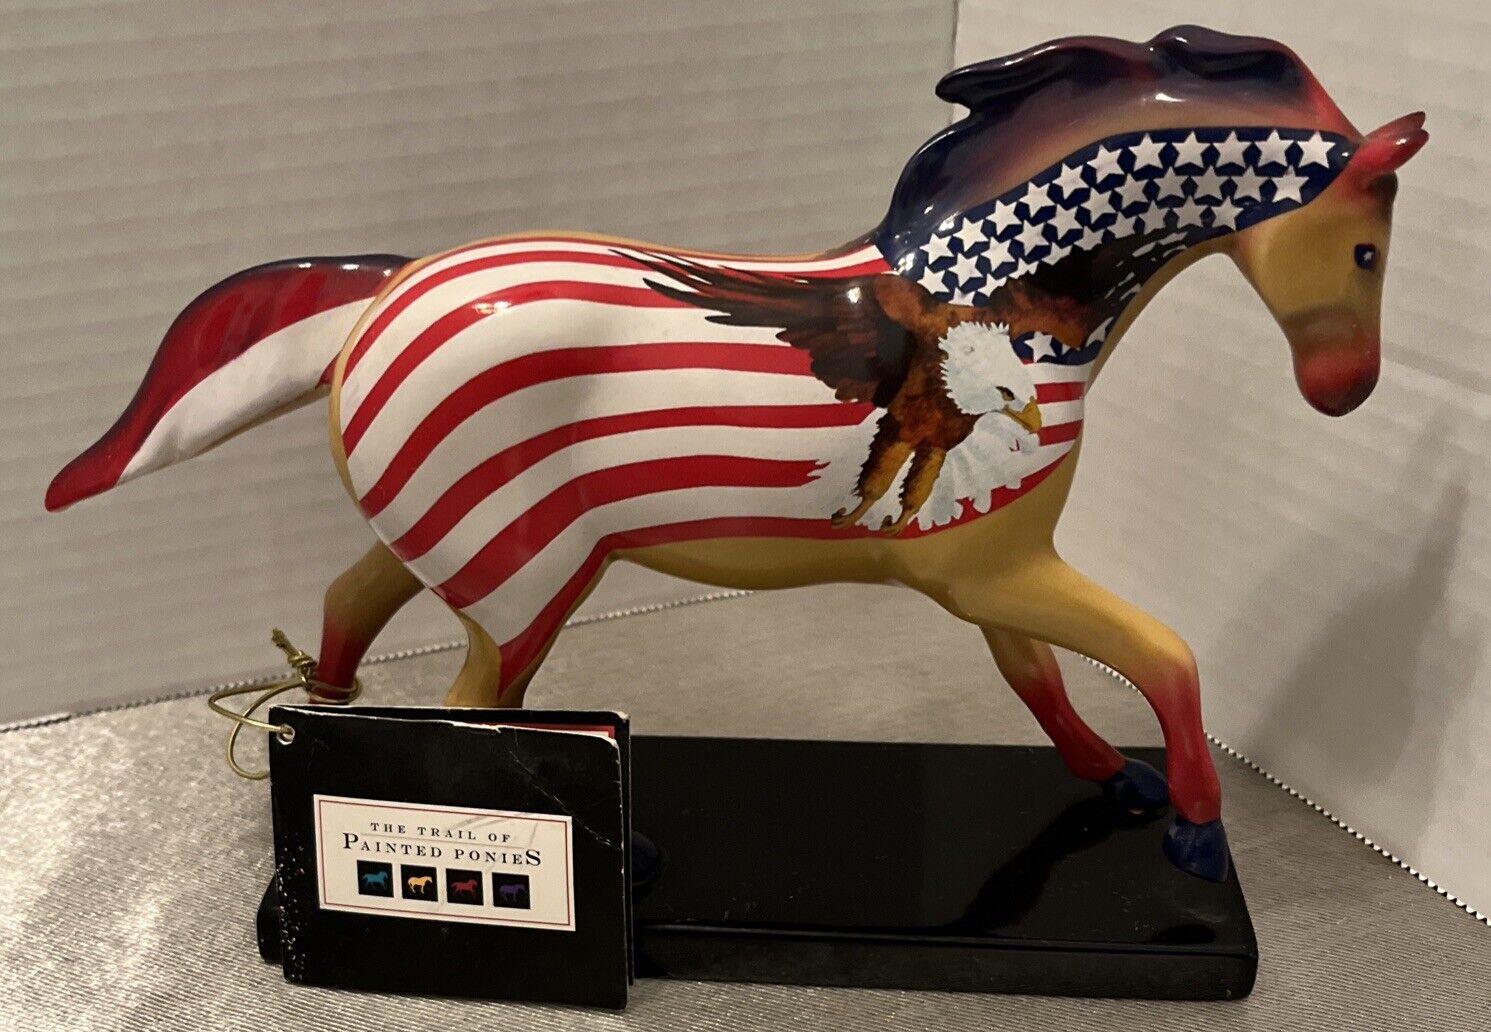 Trail of Painted Ponies Give Me Wings 1E/2683 Item 1471 2003 Eagle American Flag